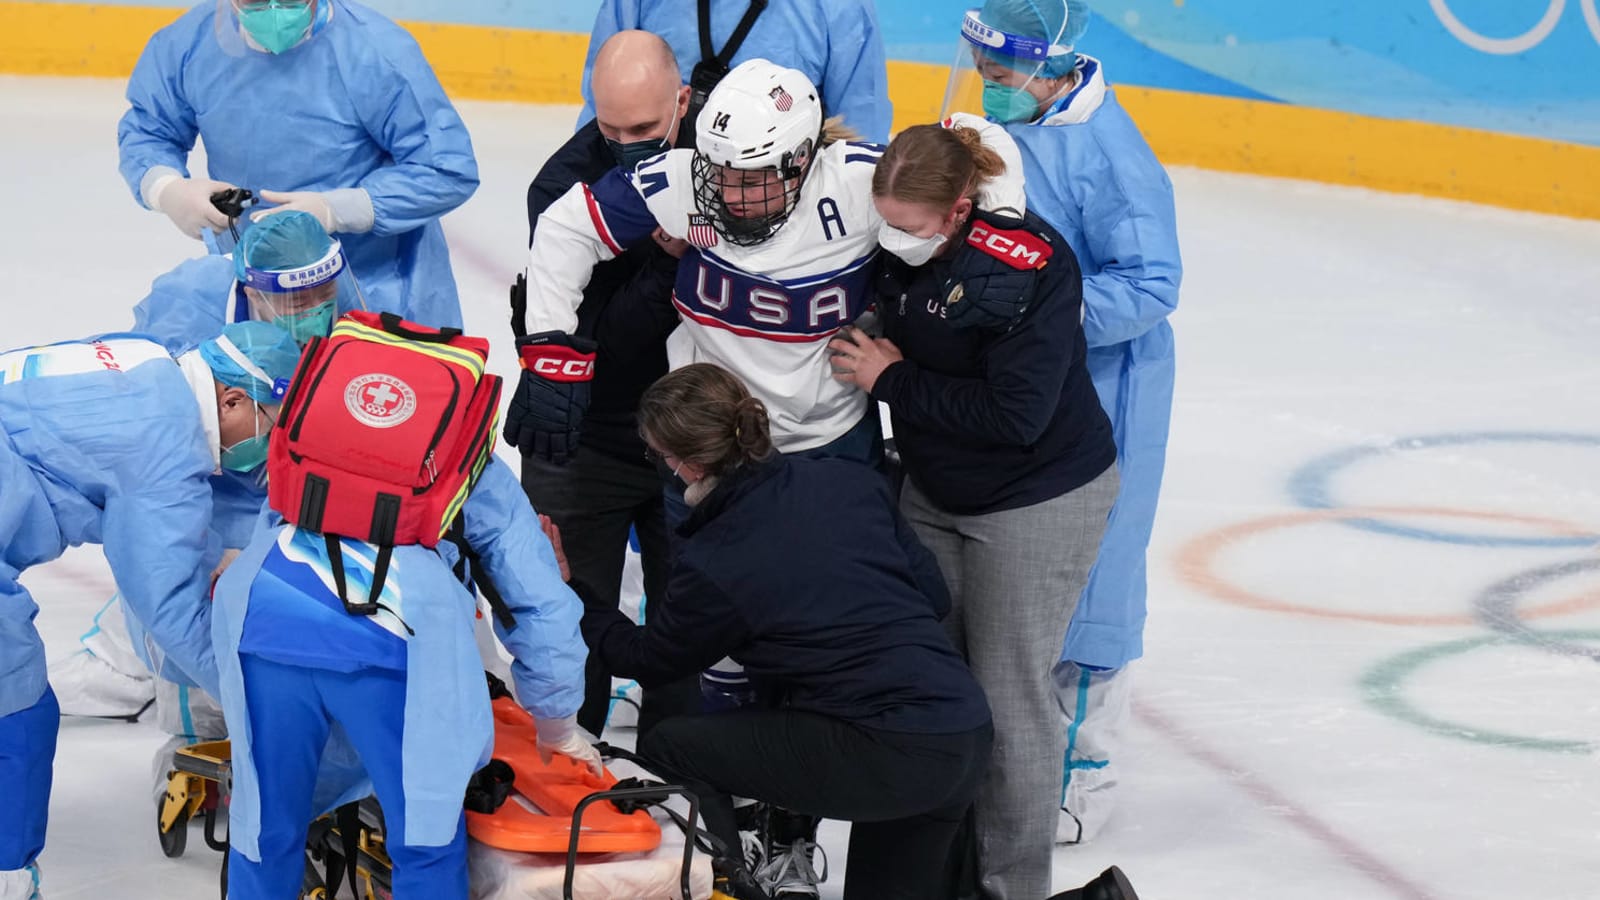 USA’s Brianna Decker out rest of Olympics with leg injury